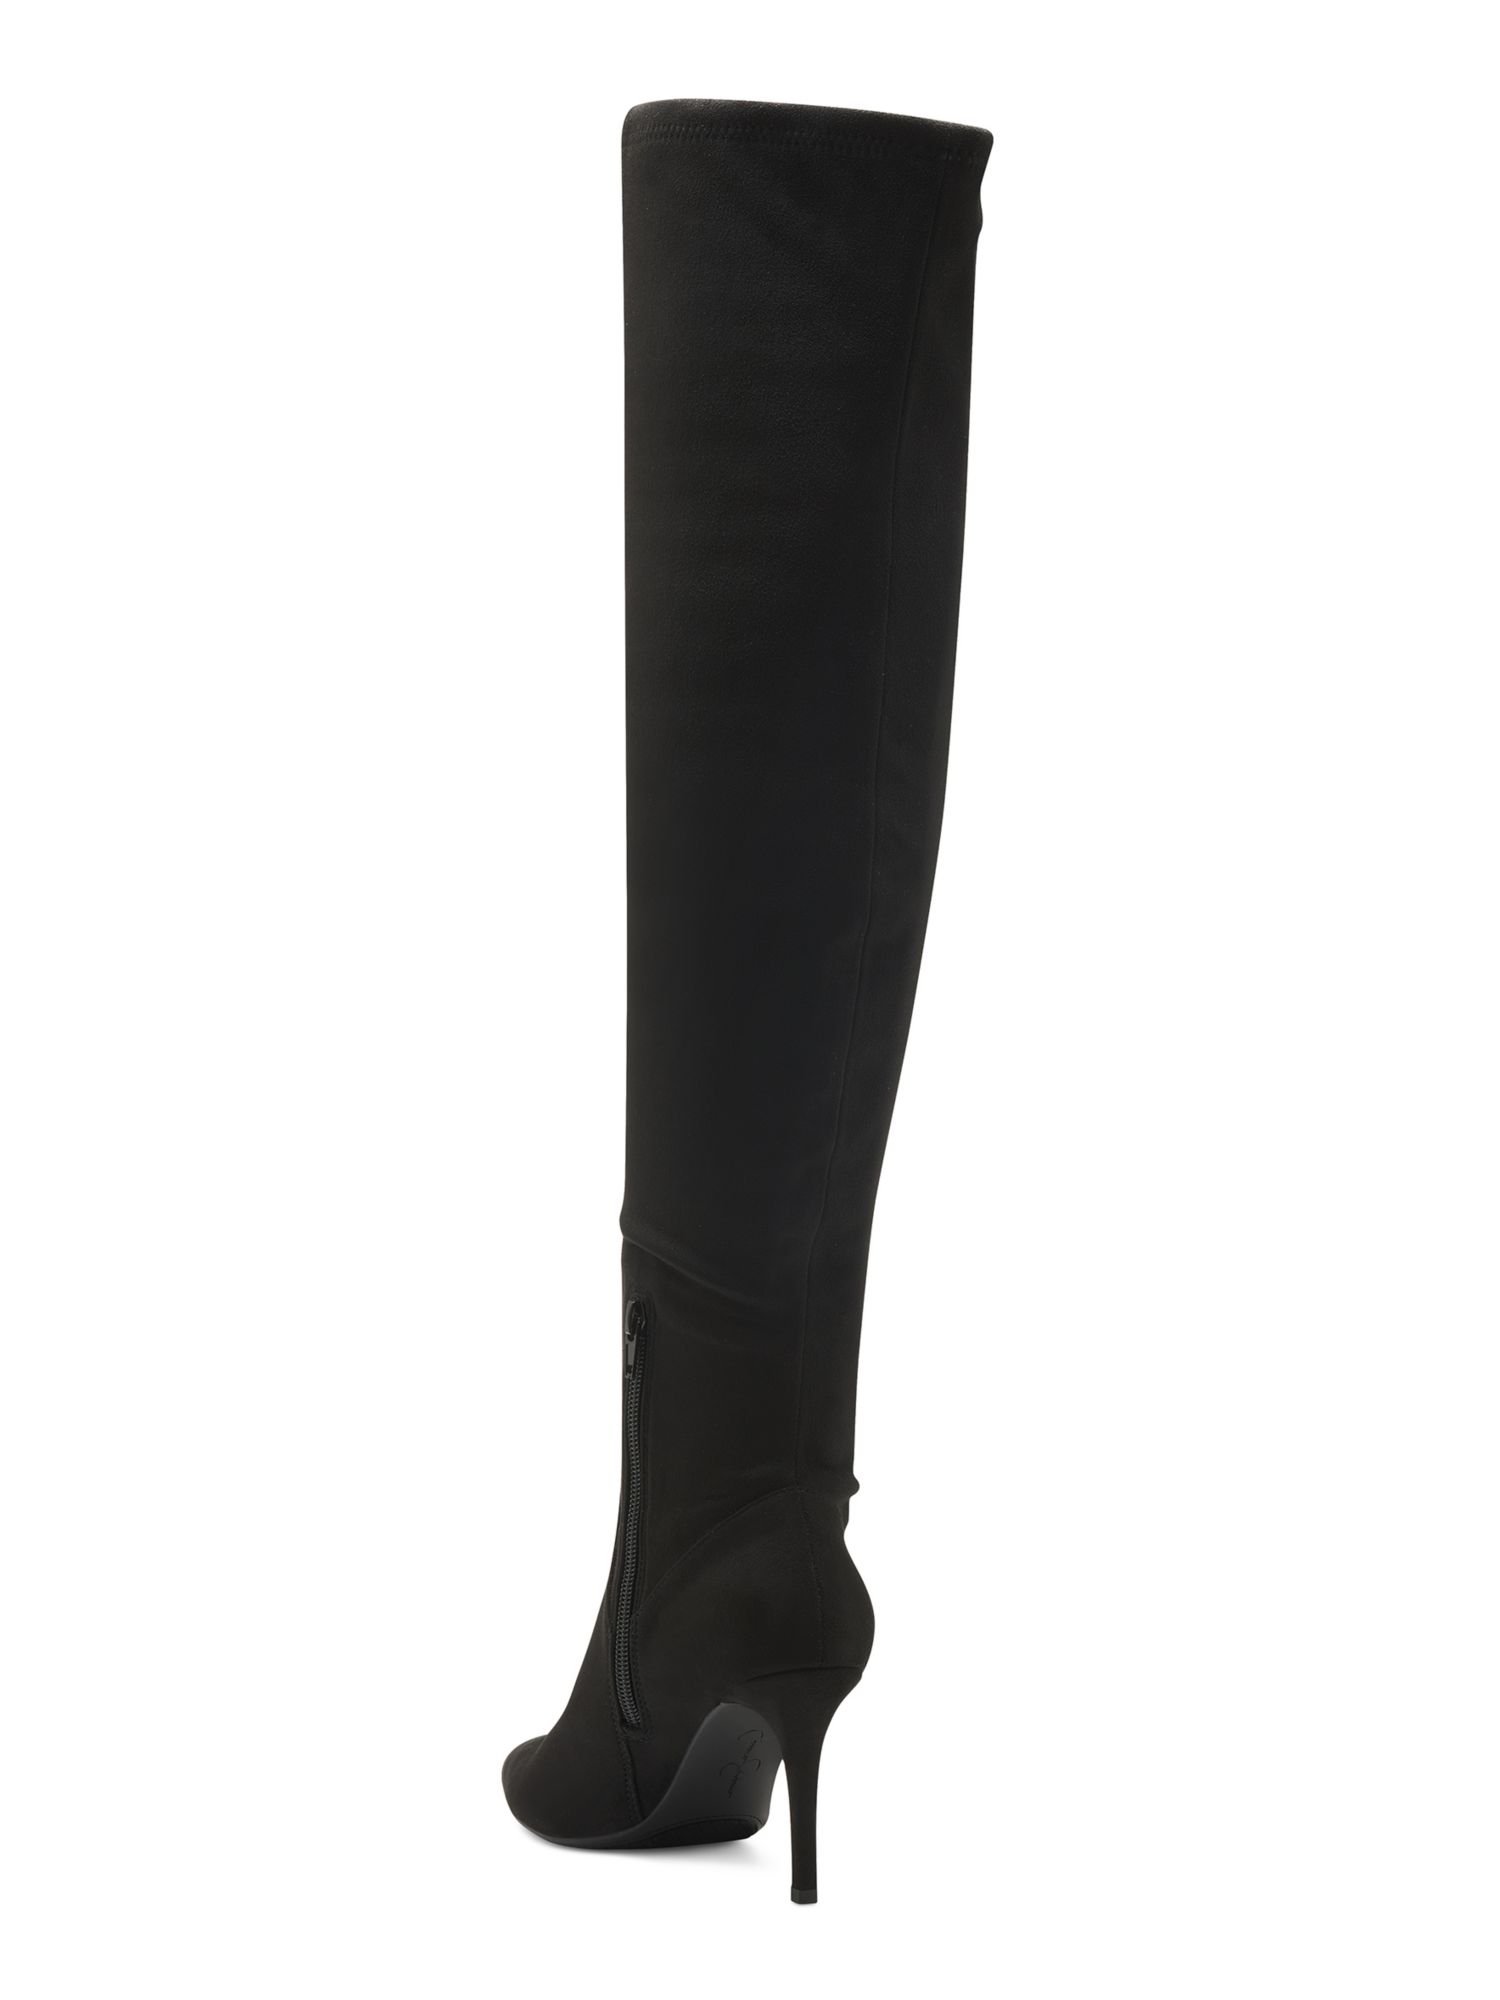 JESSICA SIMPSON Womens Almond Black Cushioned Abrine Pointed Toe Stiletto Zip-Up Dress Boots 5.5 M - image 3 of 4